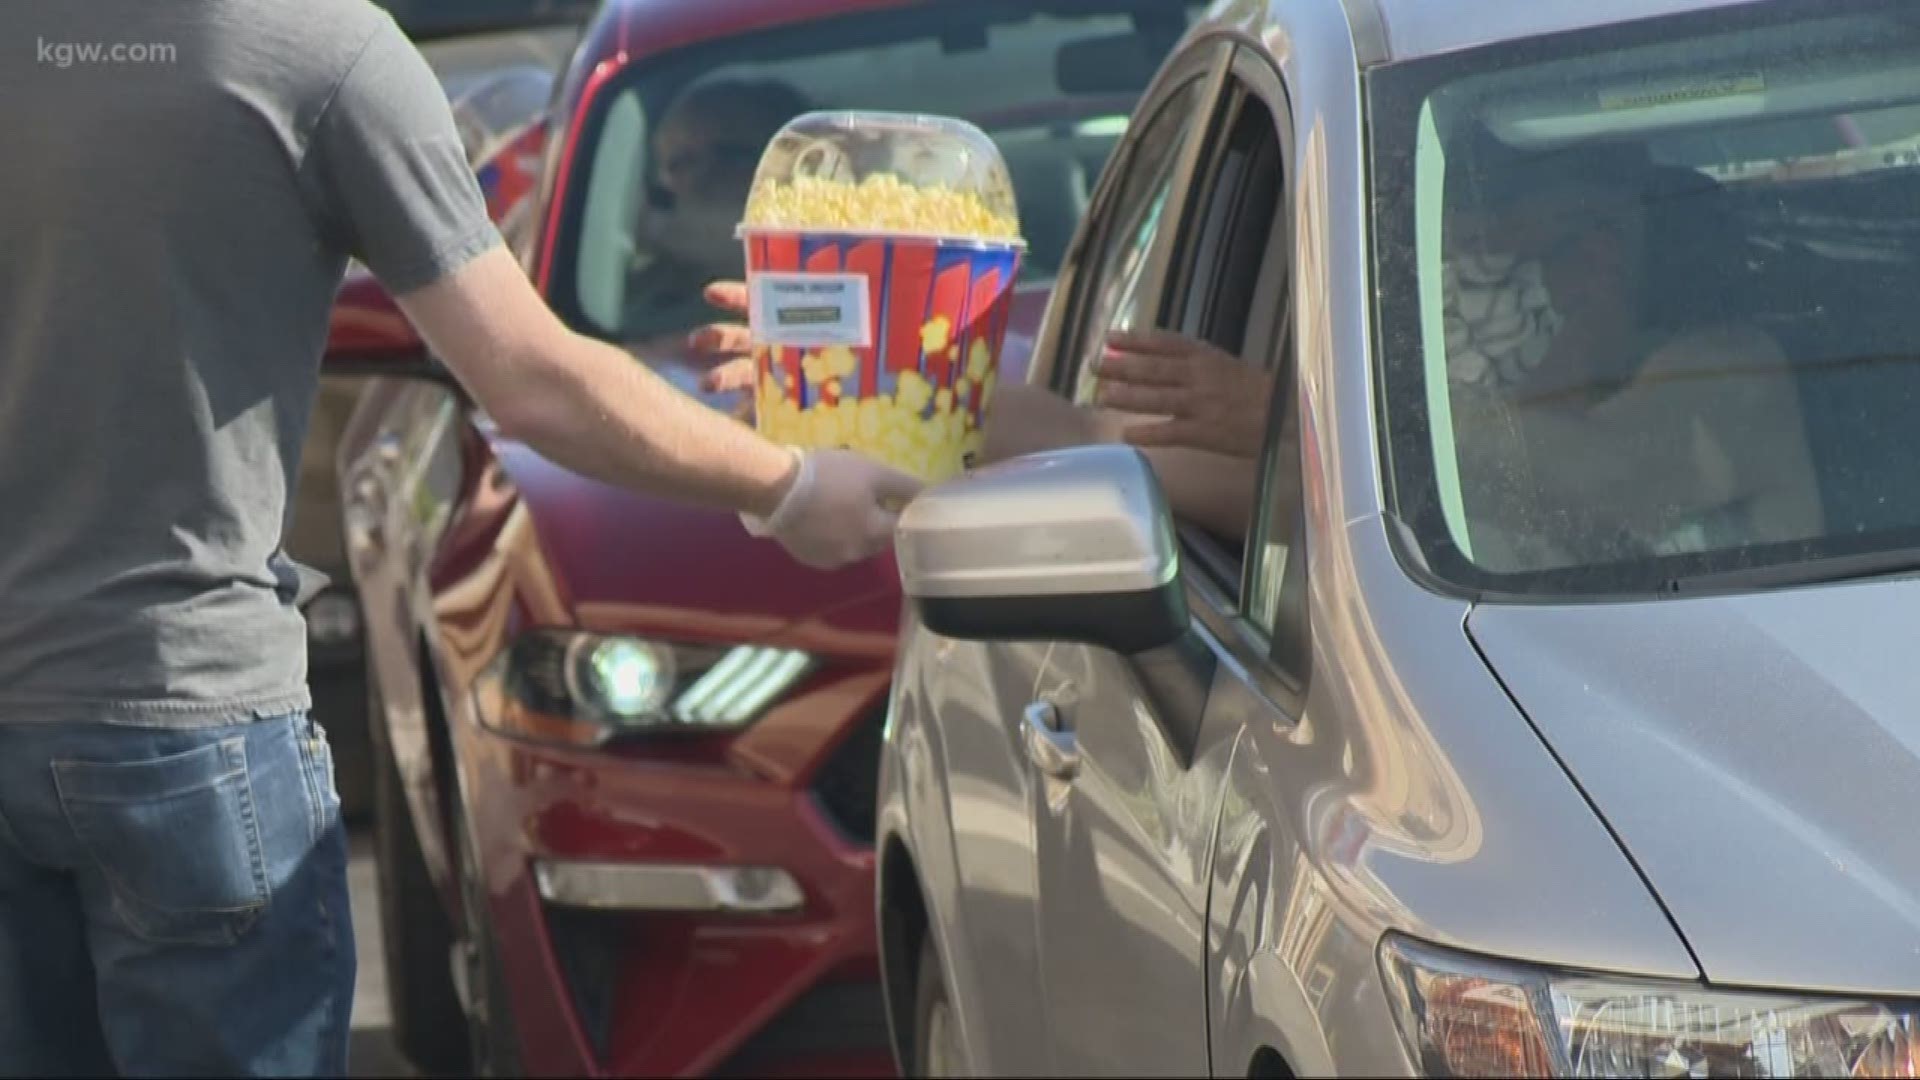 The St. Helens community rallied around a local movie theater.